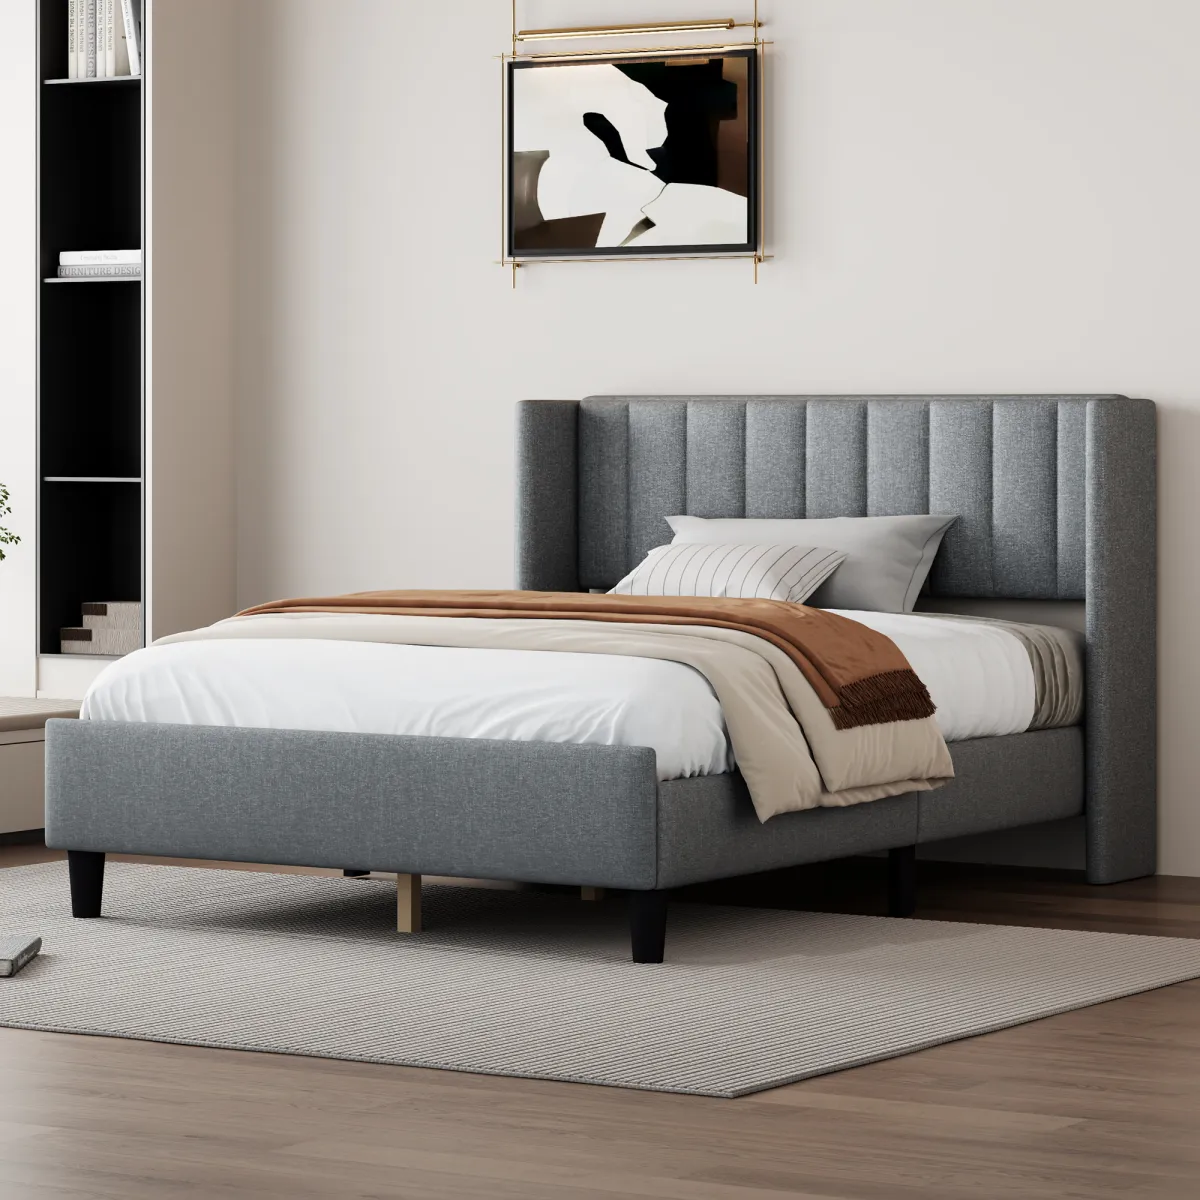 Queen size Upholstered Platform Bed Frame with Headboard, Mattress Foundation, Wood Slat Support, Quiet, no Box Spring Needed, Easy to Assemble Light Grey